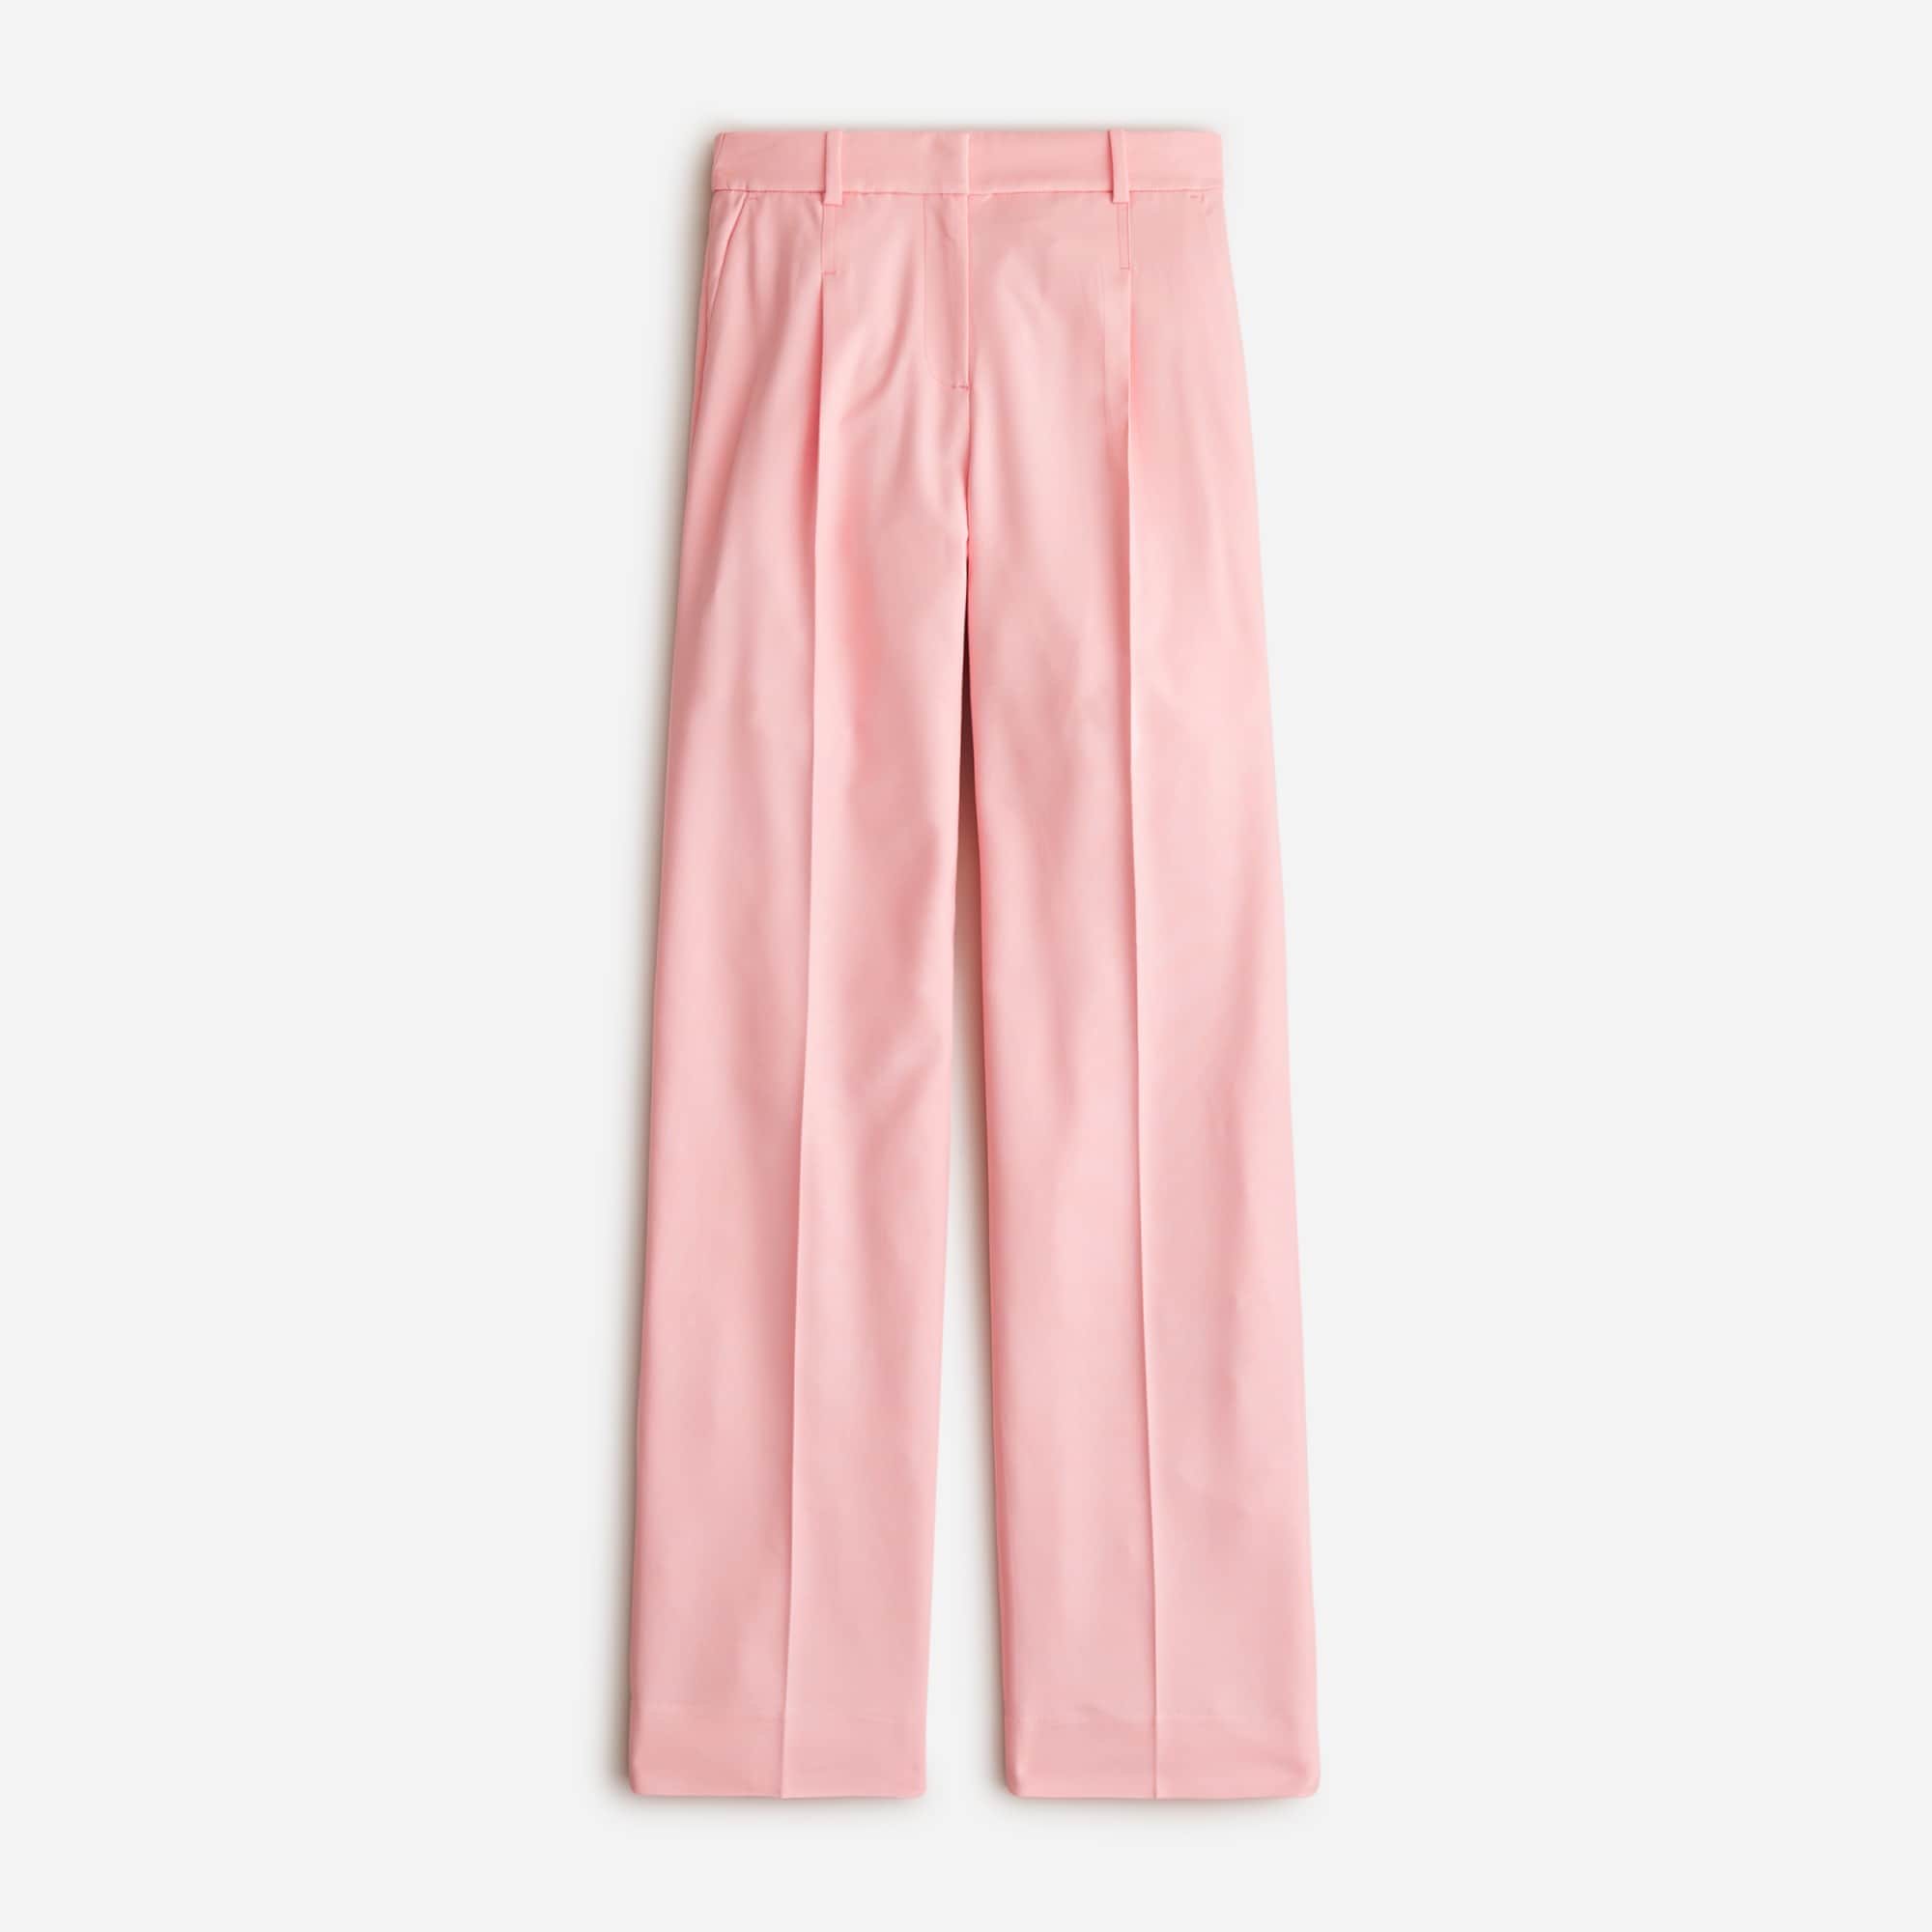  Essential pant in city twill